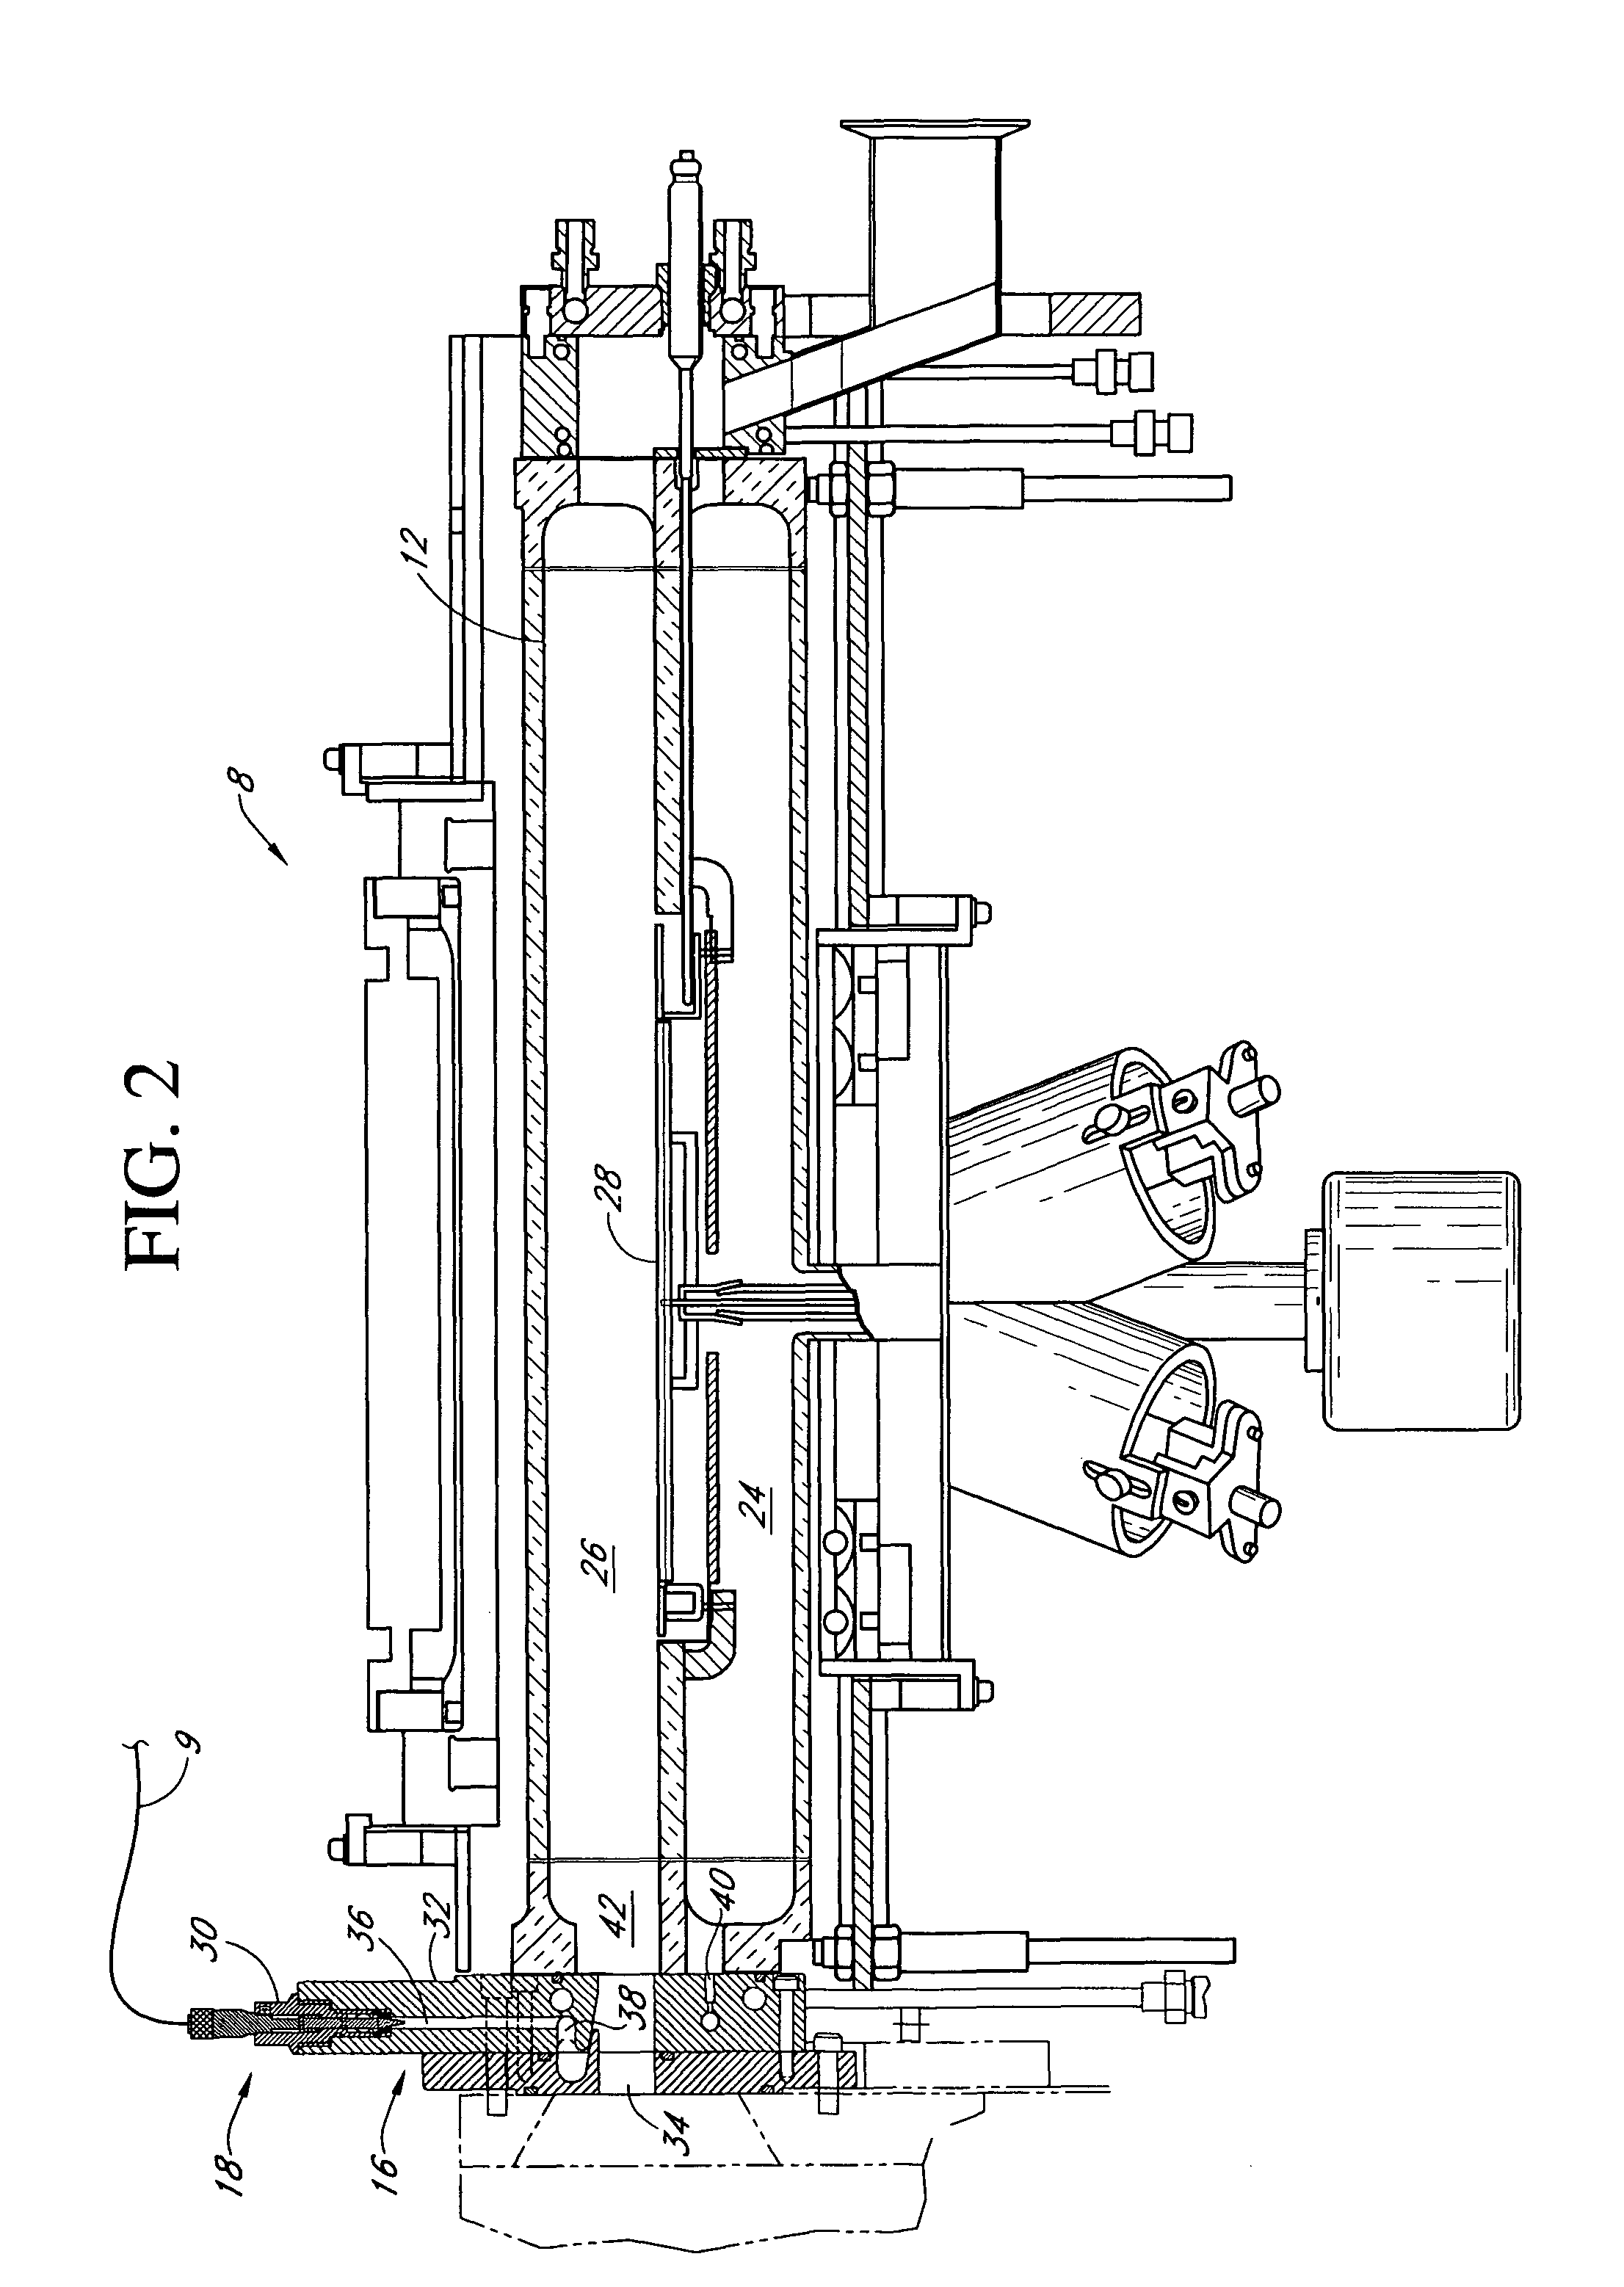 System for control of gas injectors